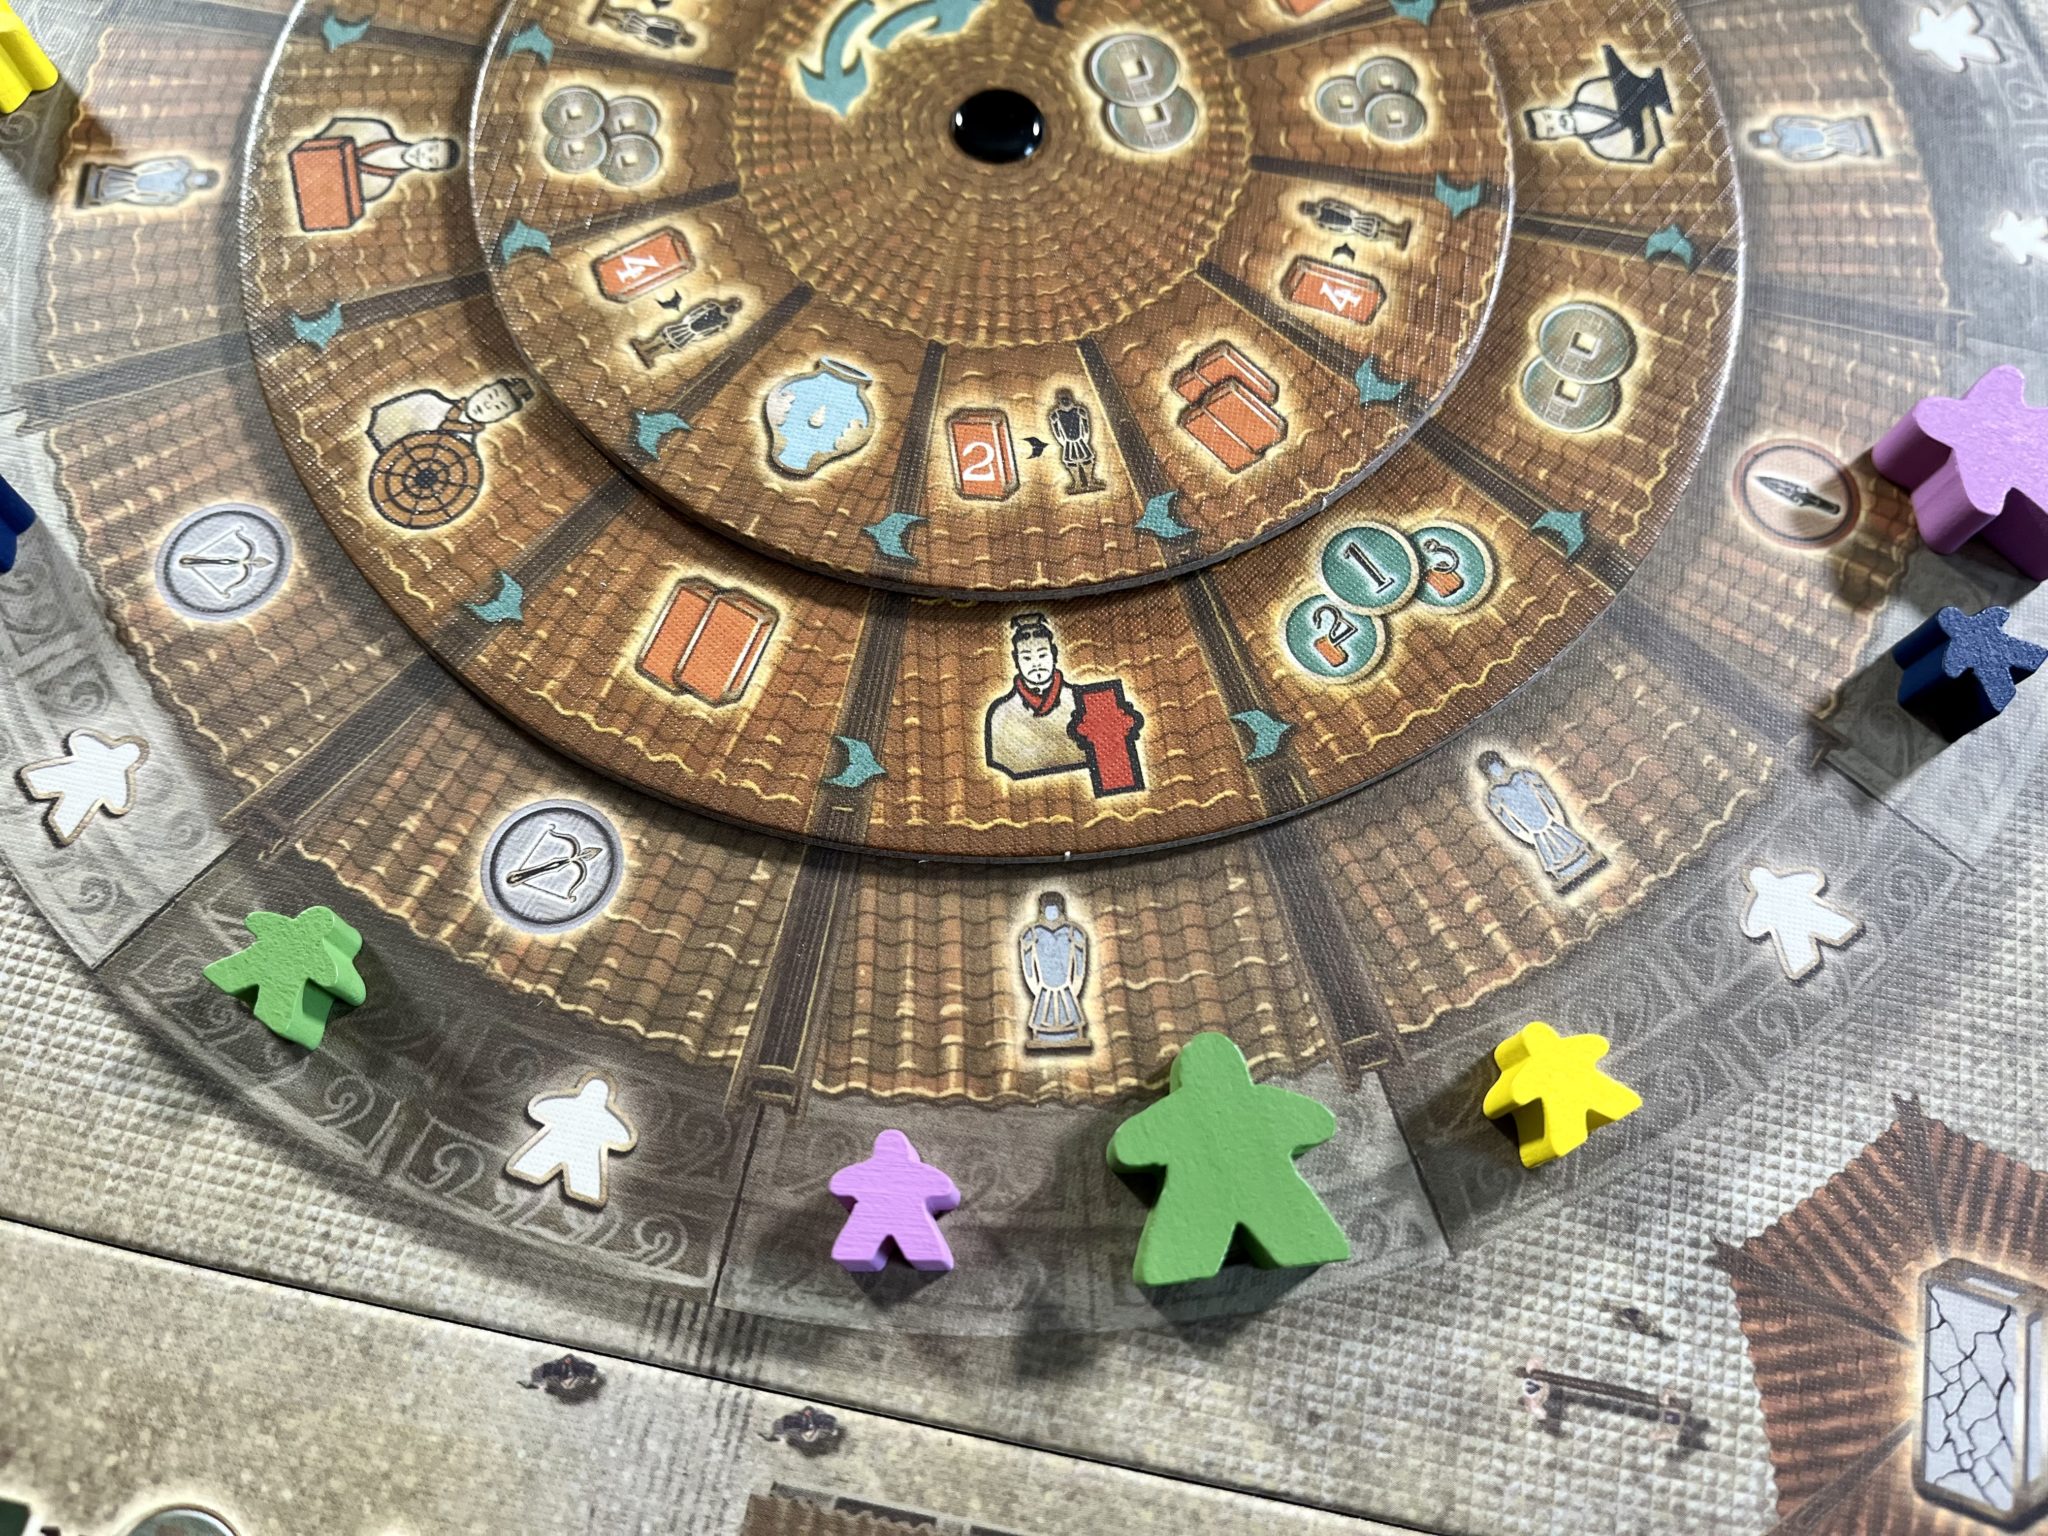 Terracotta Army worker placement wheel